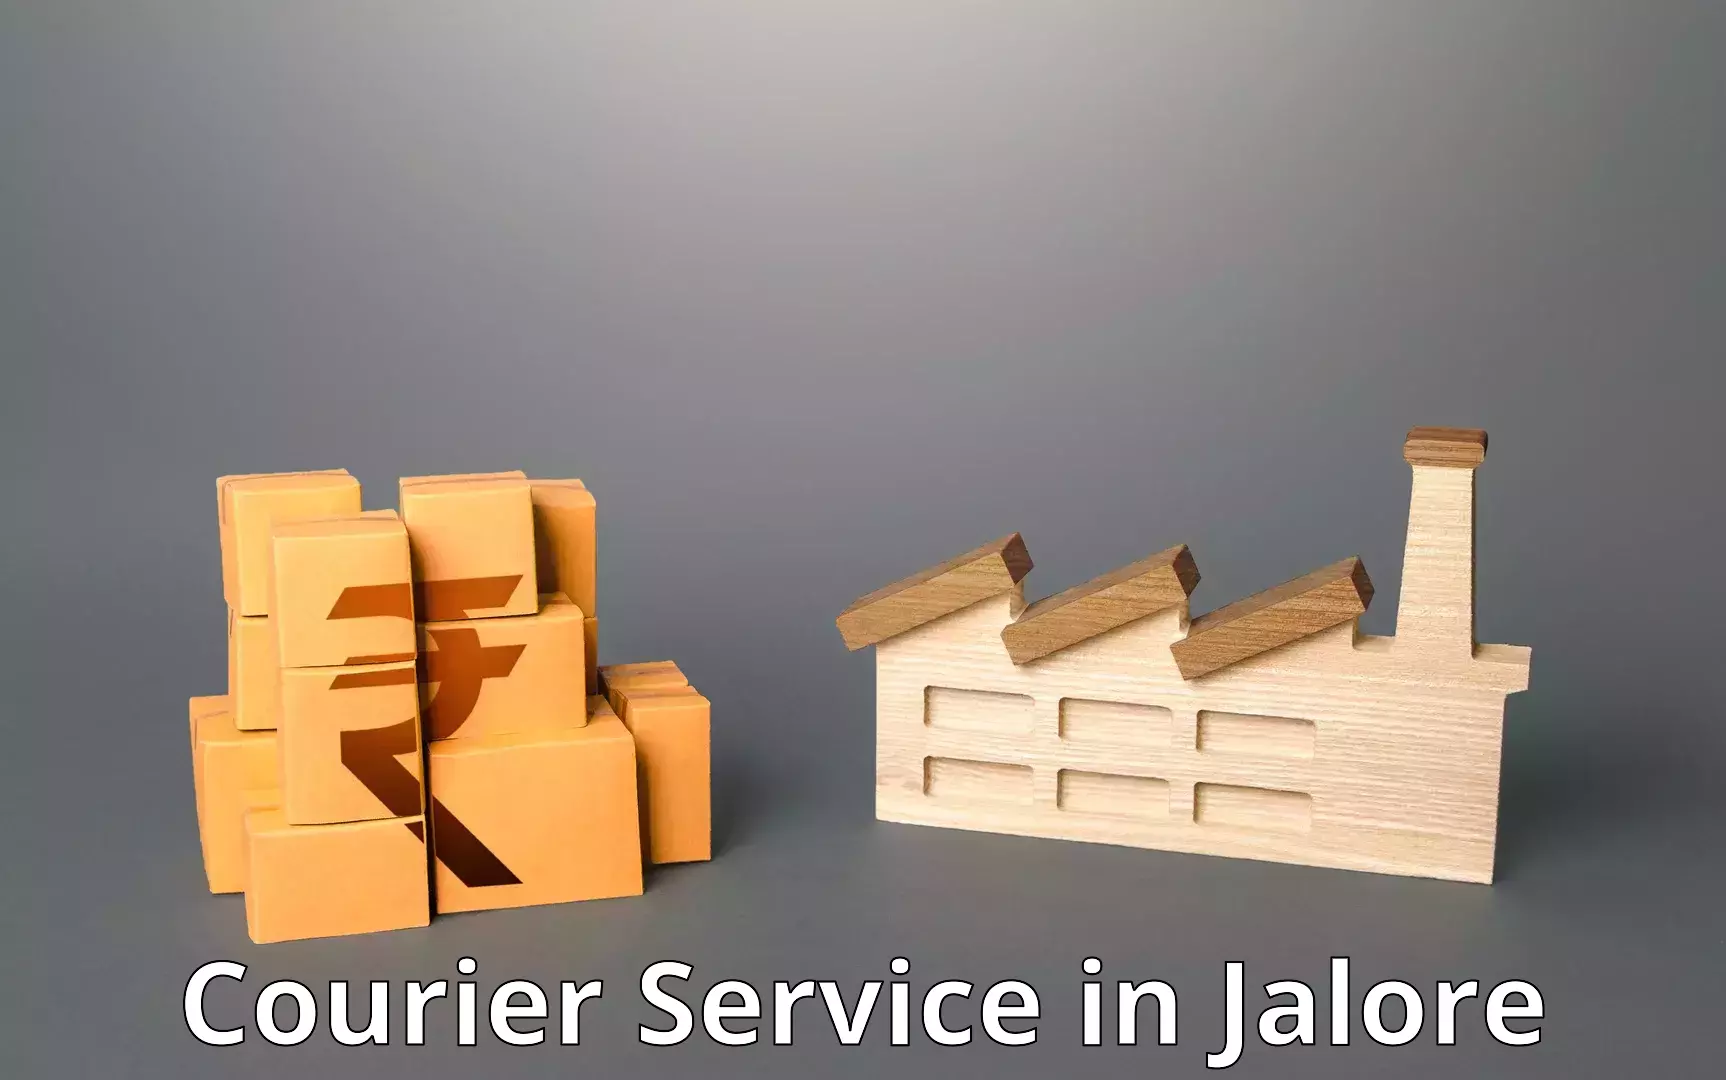 Digital shipping tools in Jalore